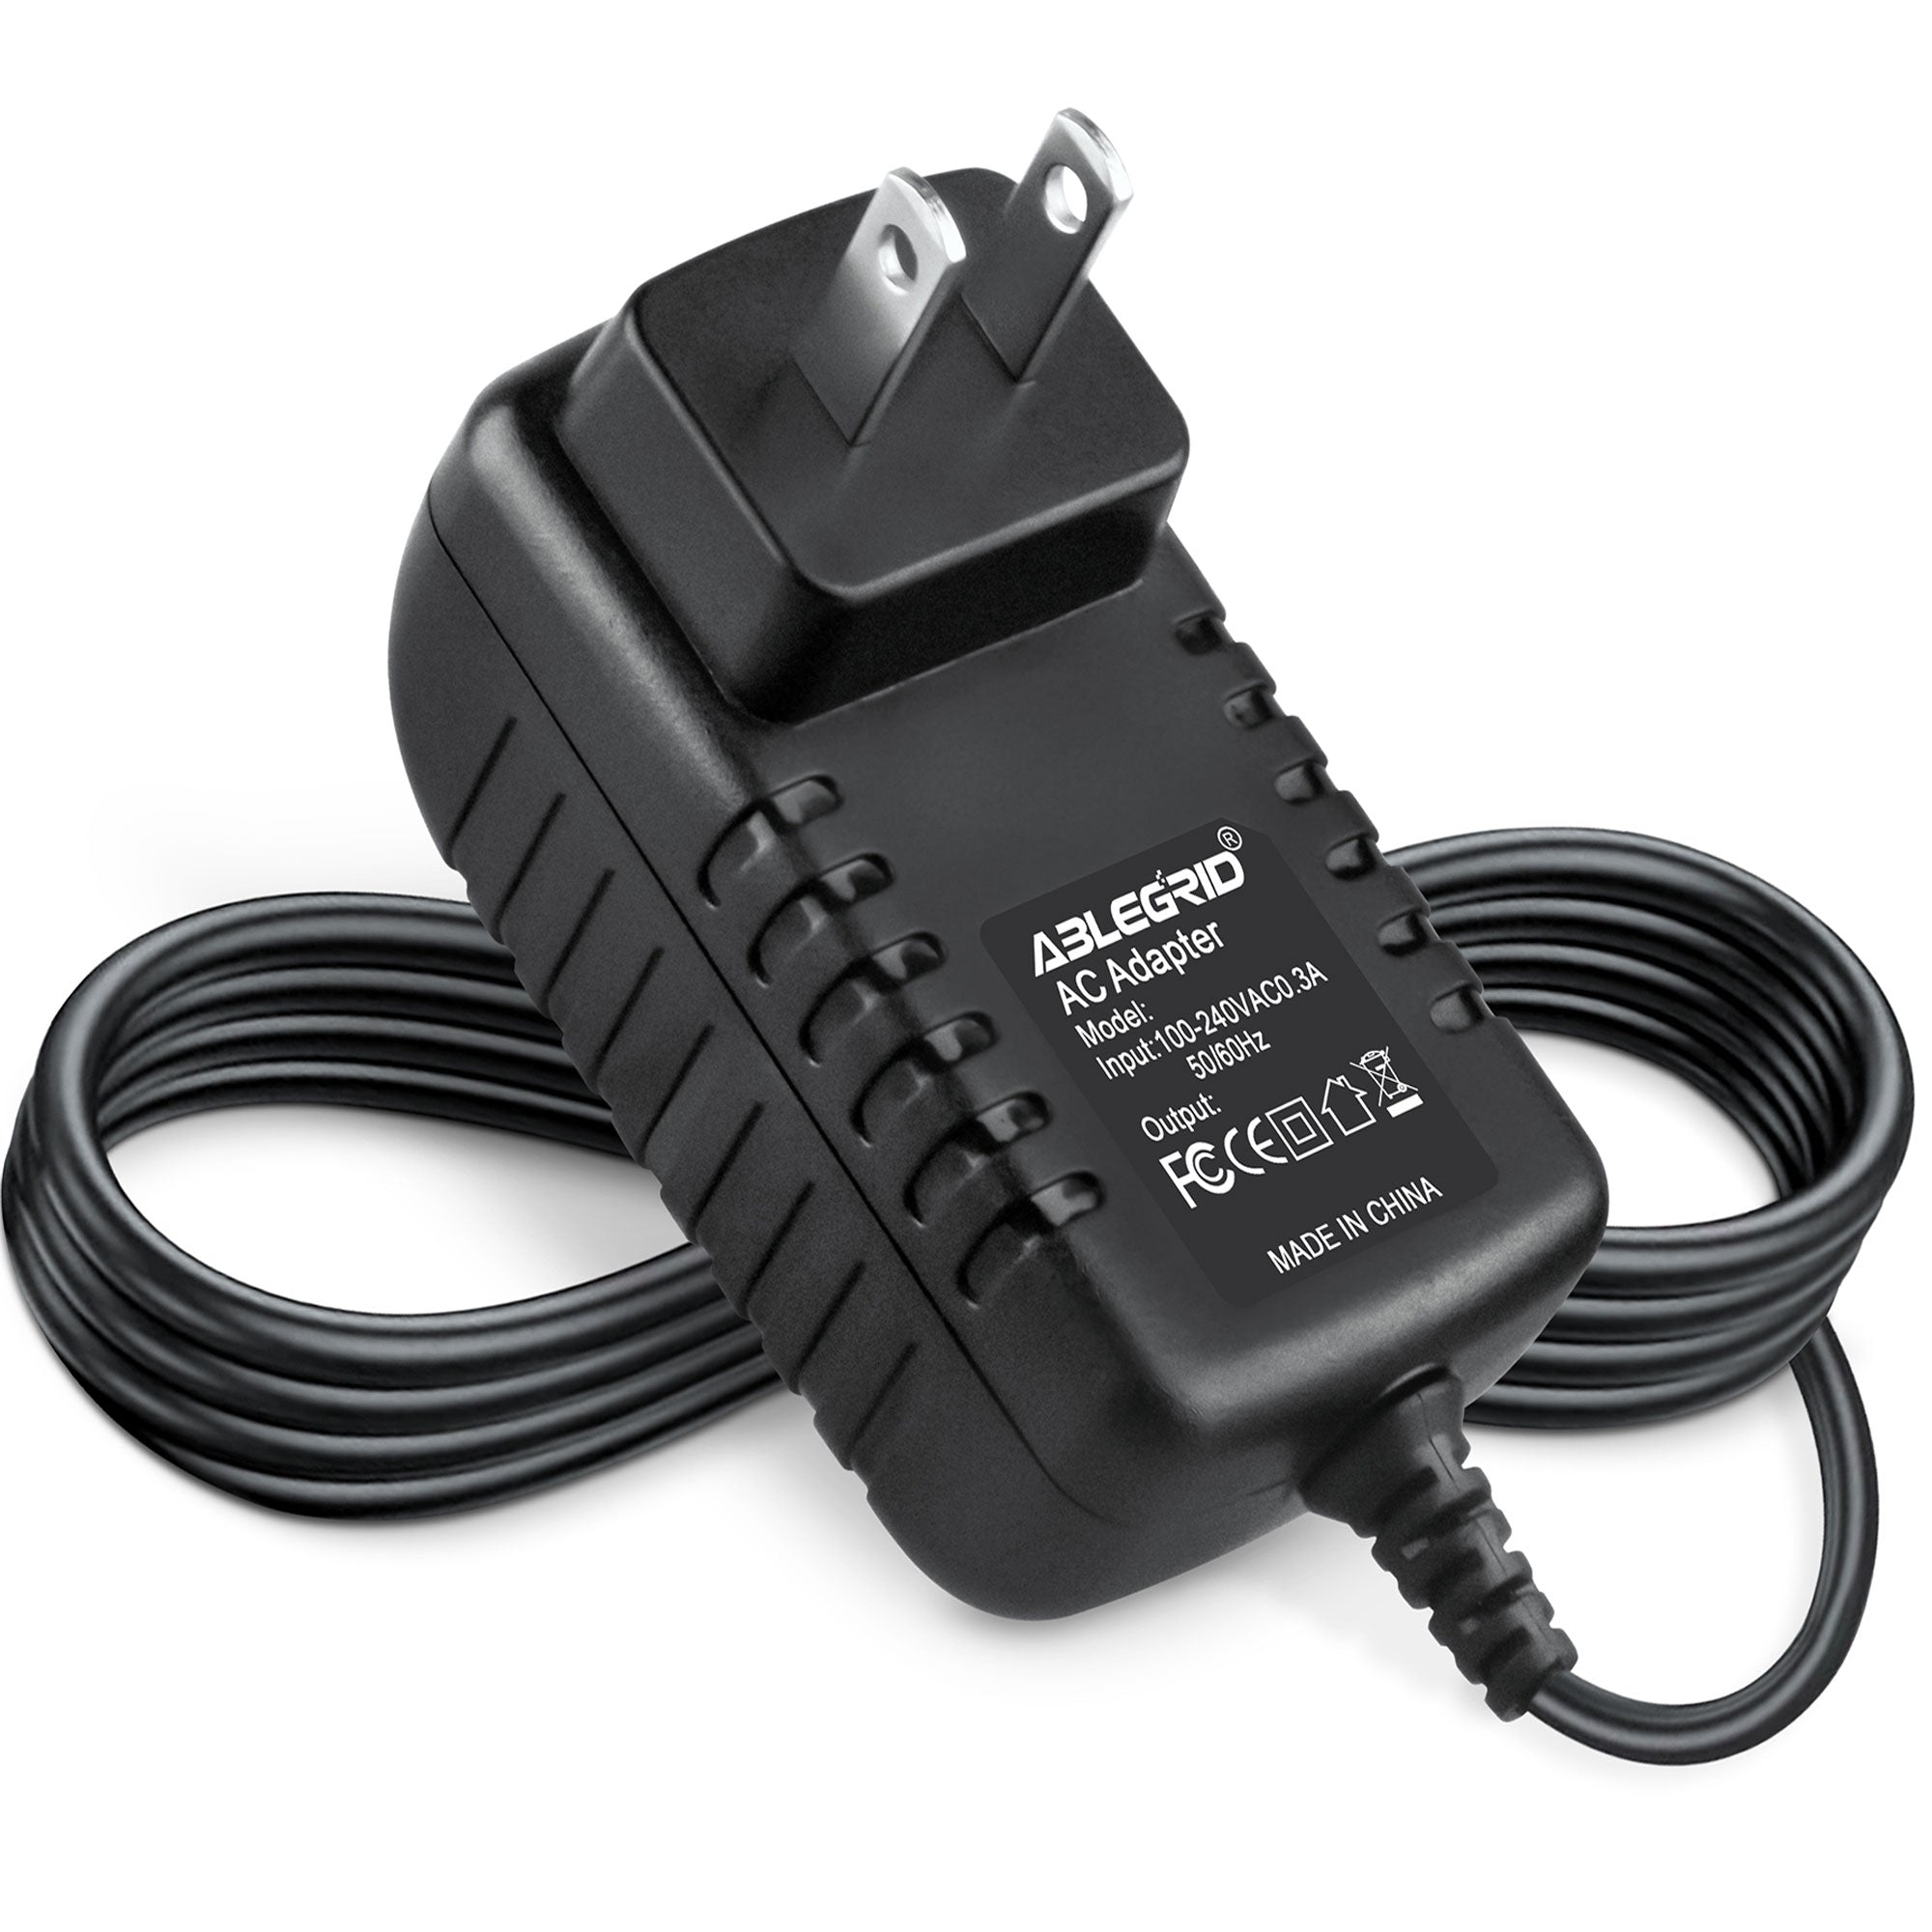 AbleGrid AC-DC Adapter for Model Number : HT73005B Class 2 transformer Power Supply Cord Cable PS Wall Home Charger Input: 100V - 120V AC - 240 VAC 50/60Hz Worldwide Voltage Use PSU